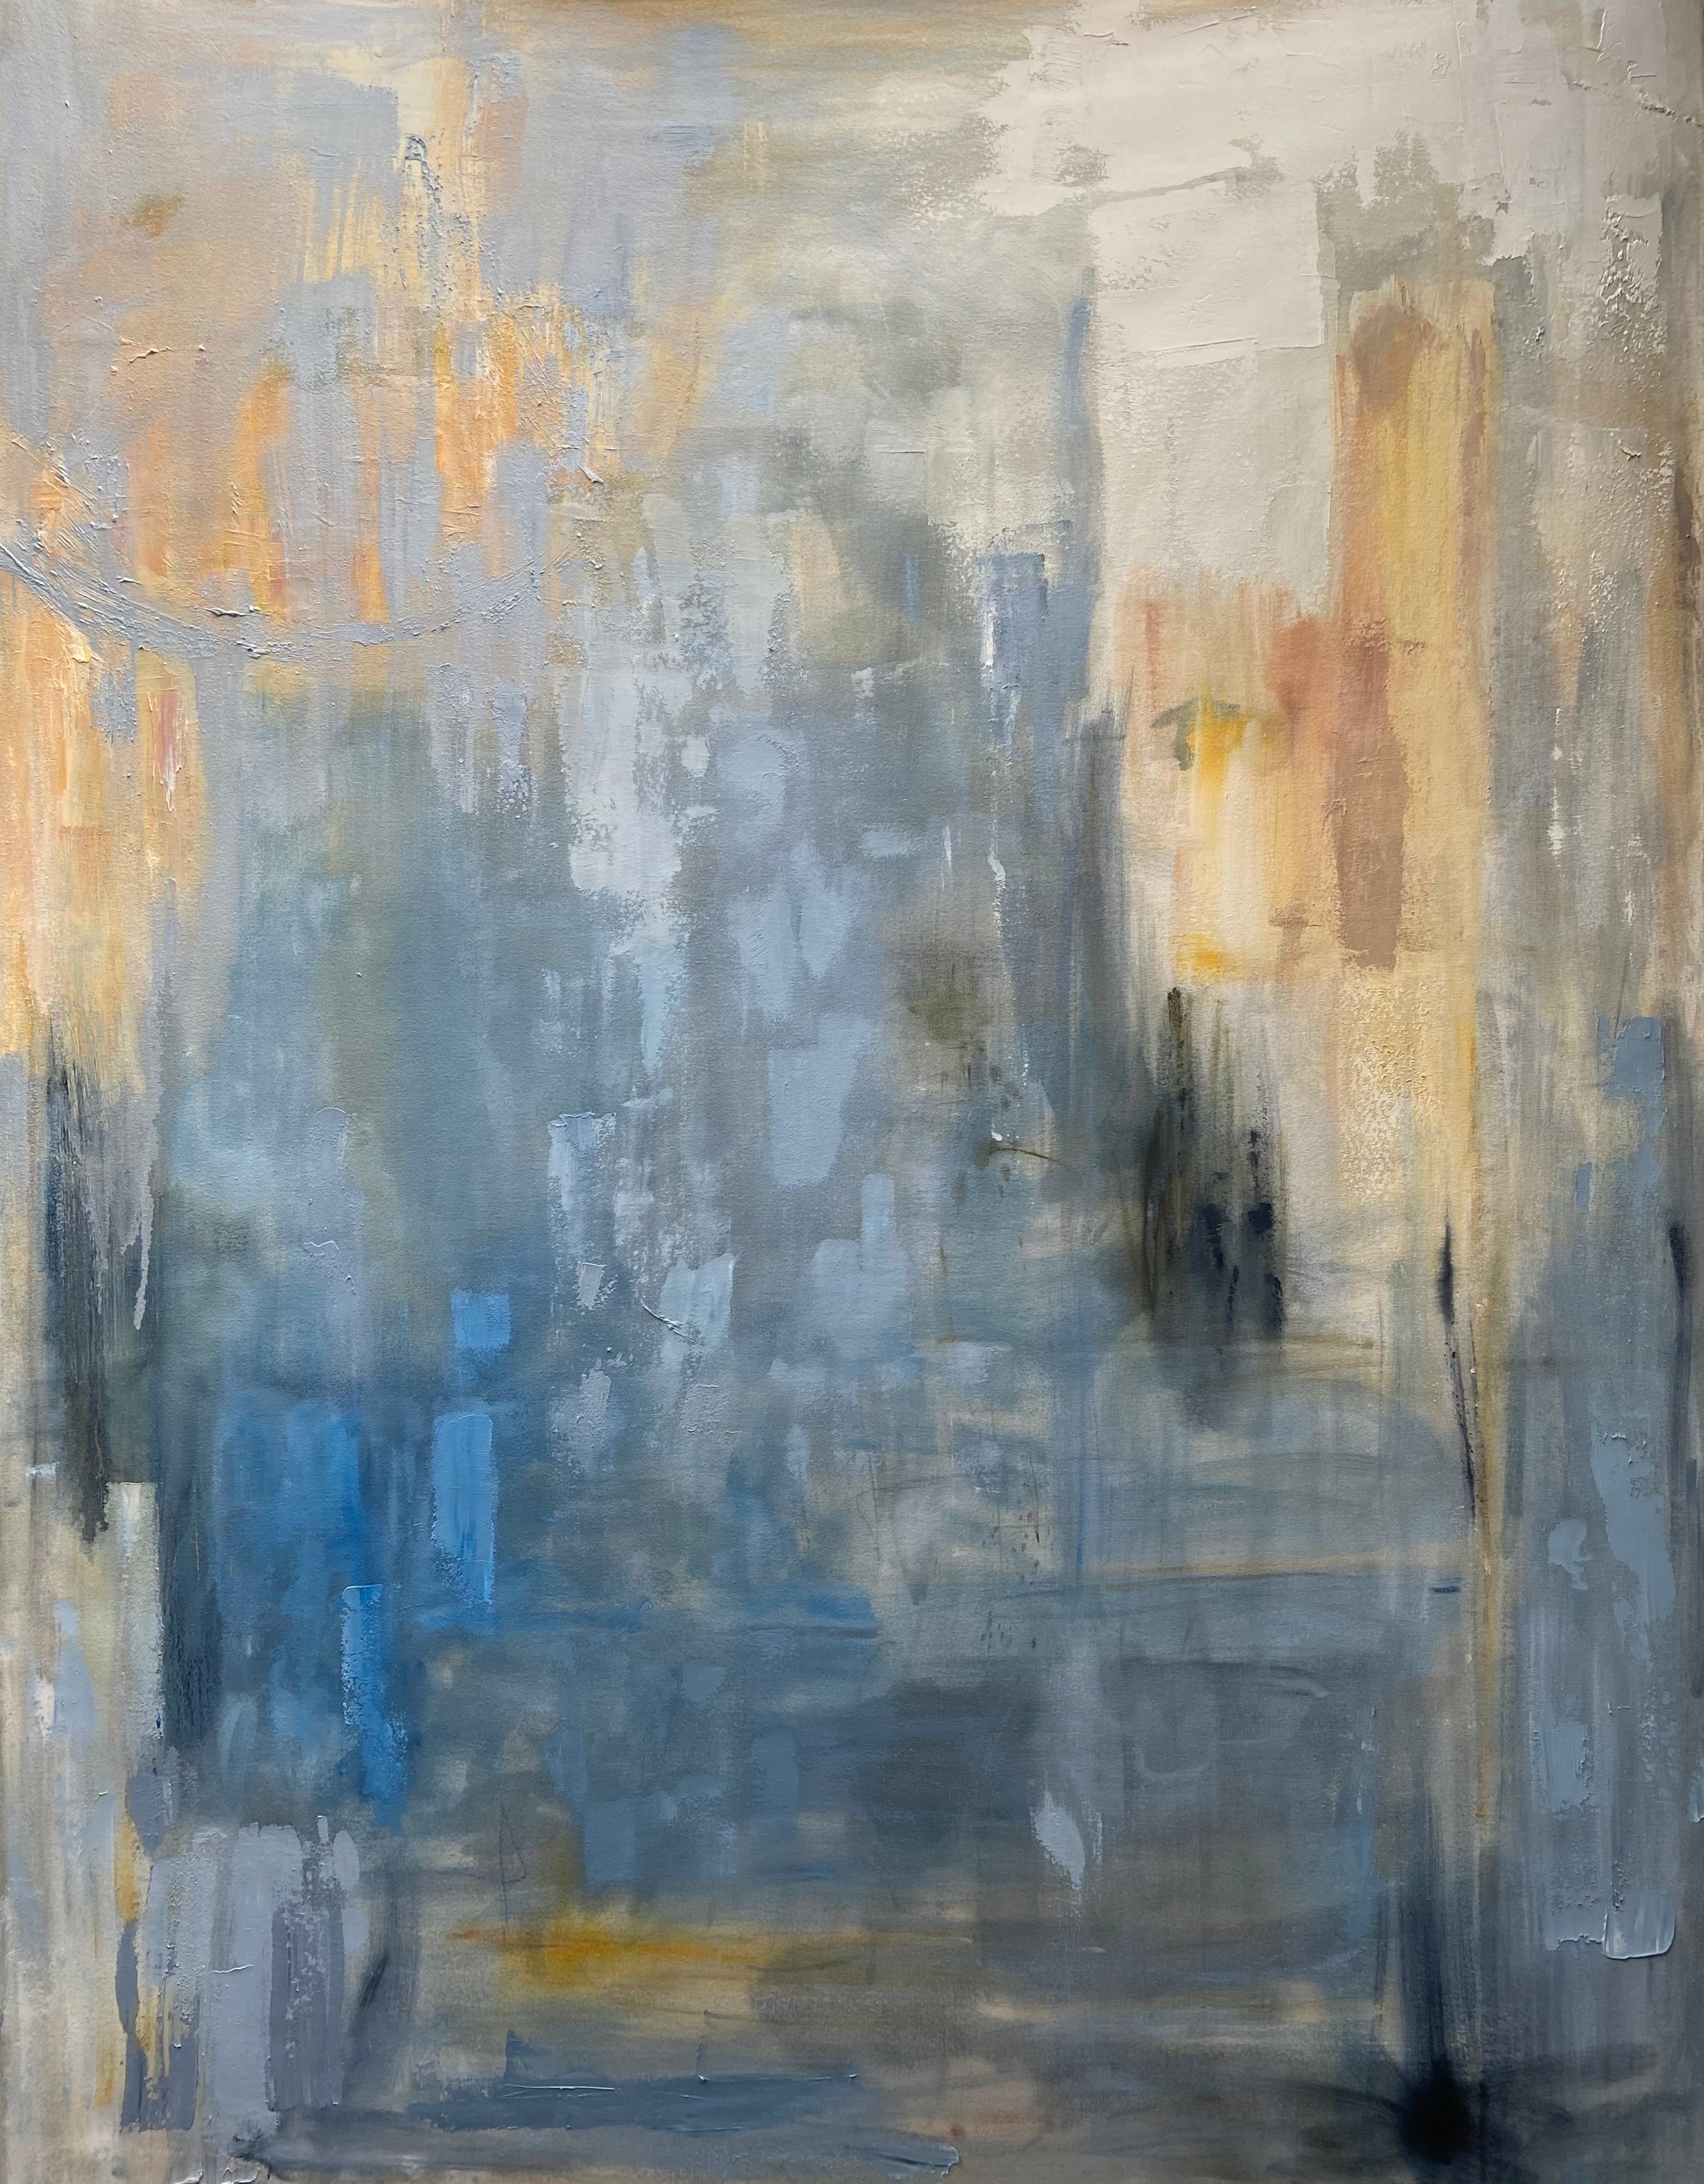 large abstract oil painting commission, 60x48"